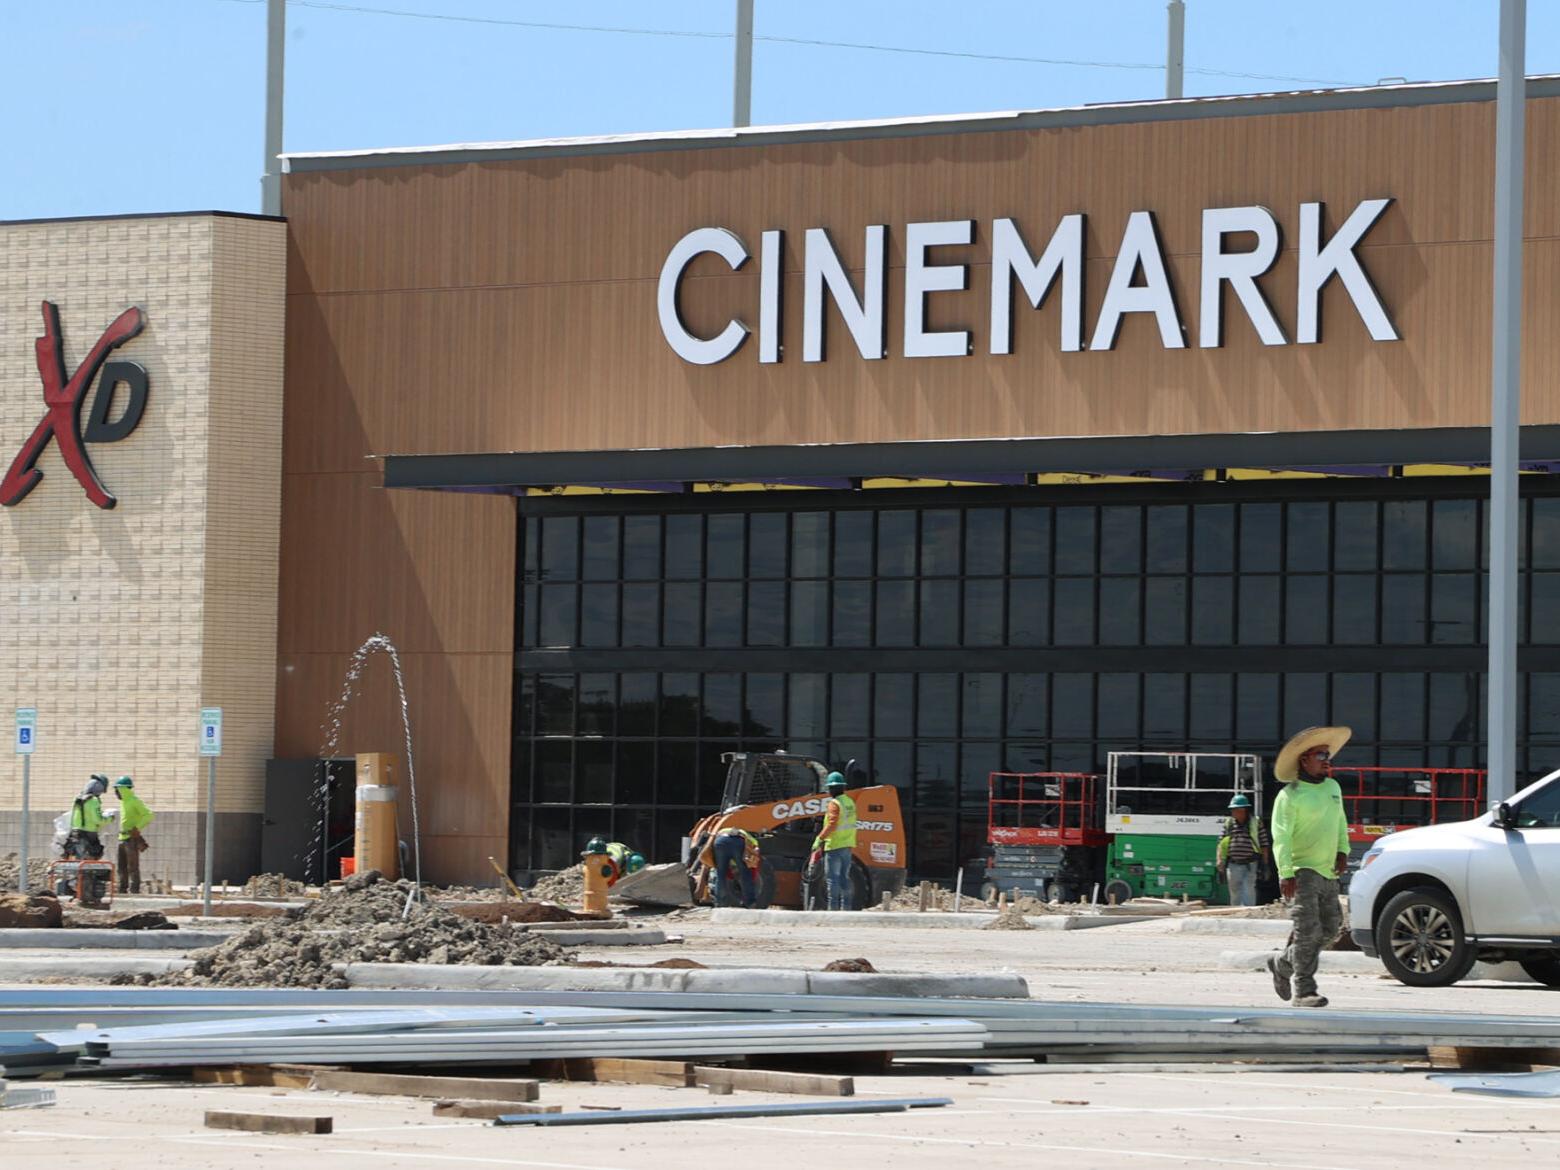 Wacos New 14-screen Cinemark Theater To Open In Three Weeks Local Business News Wacotribcom